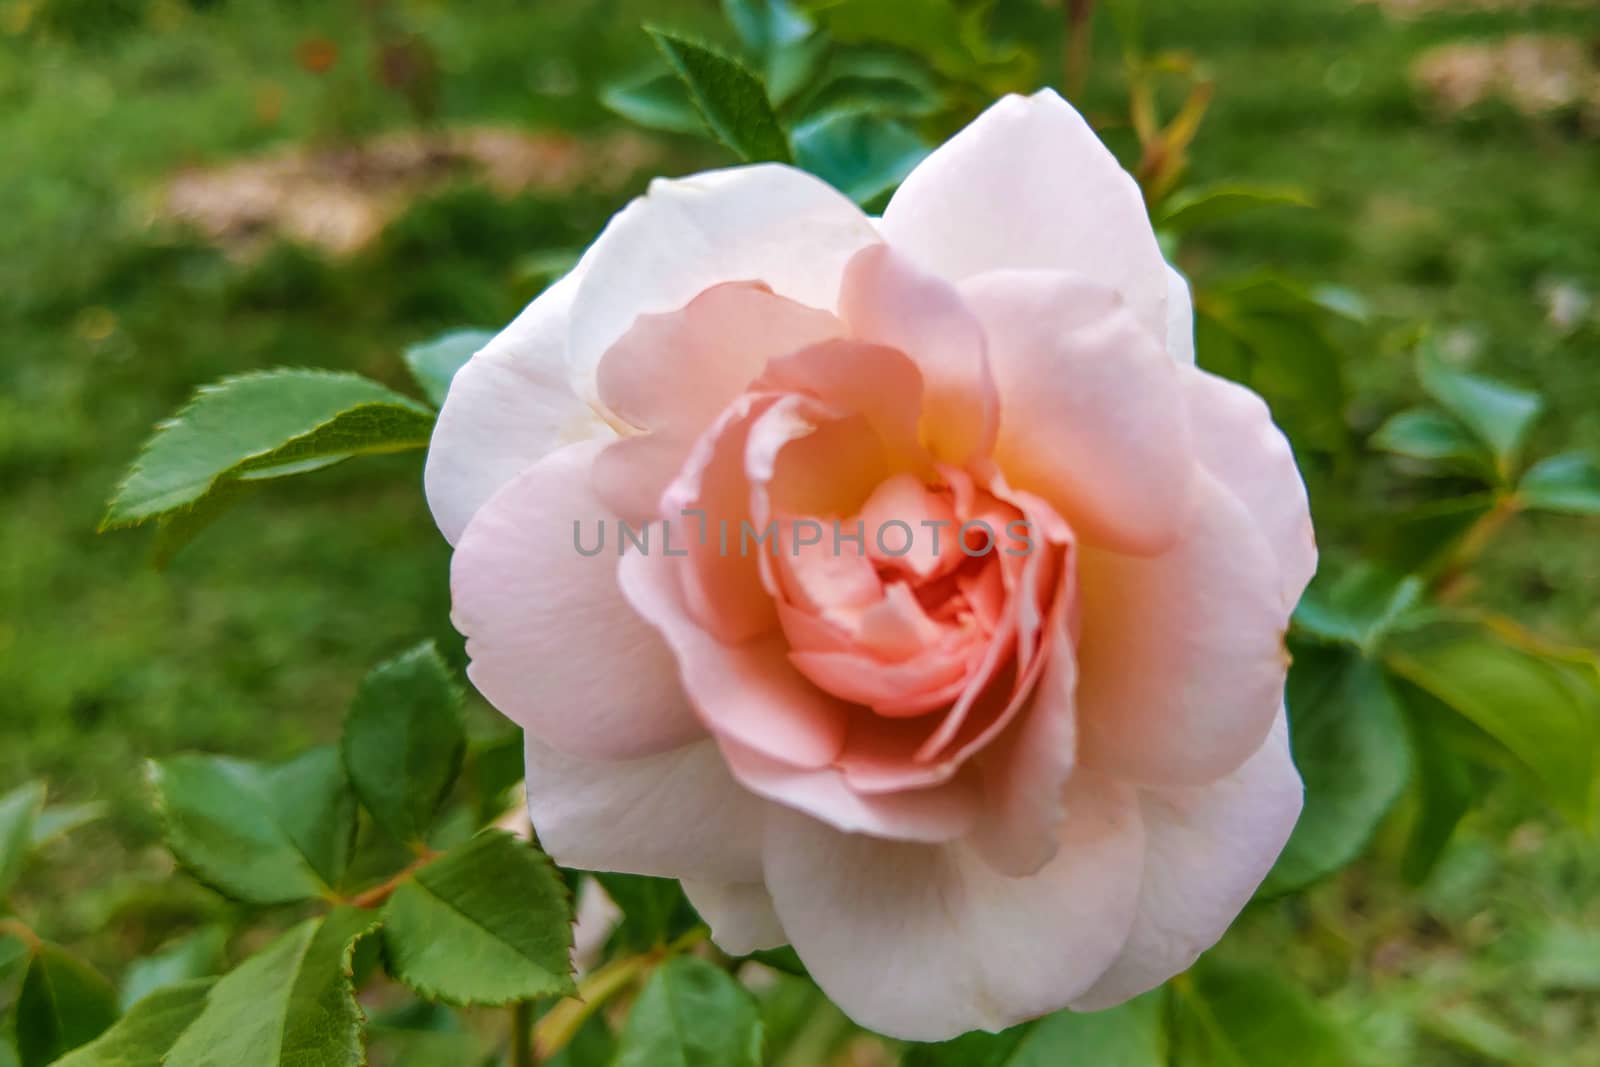 Pink rose flowers with background blurred in the garden by kip02kas